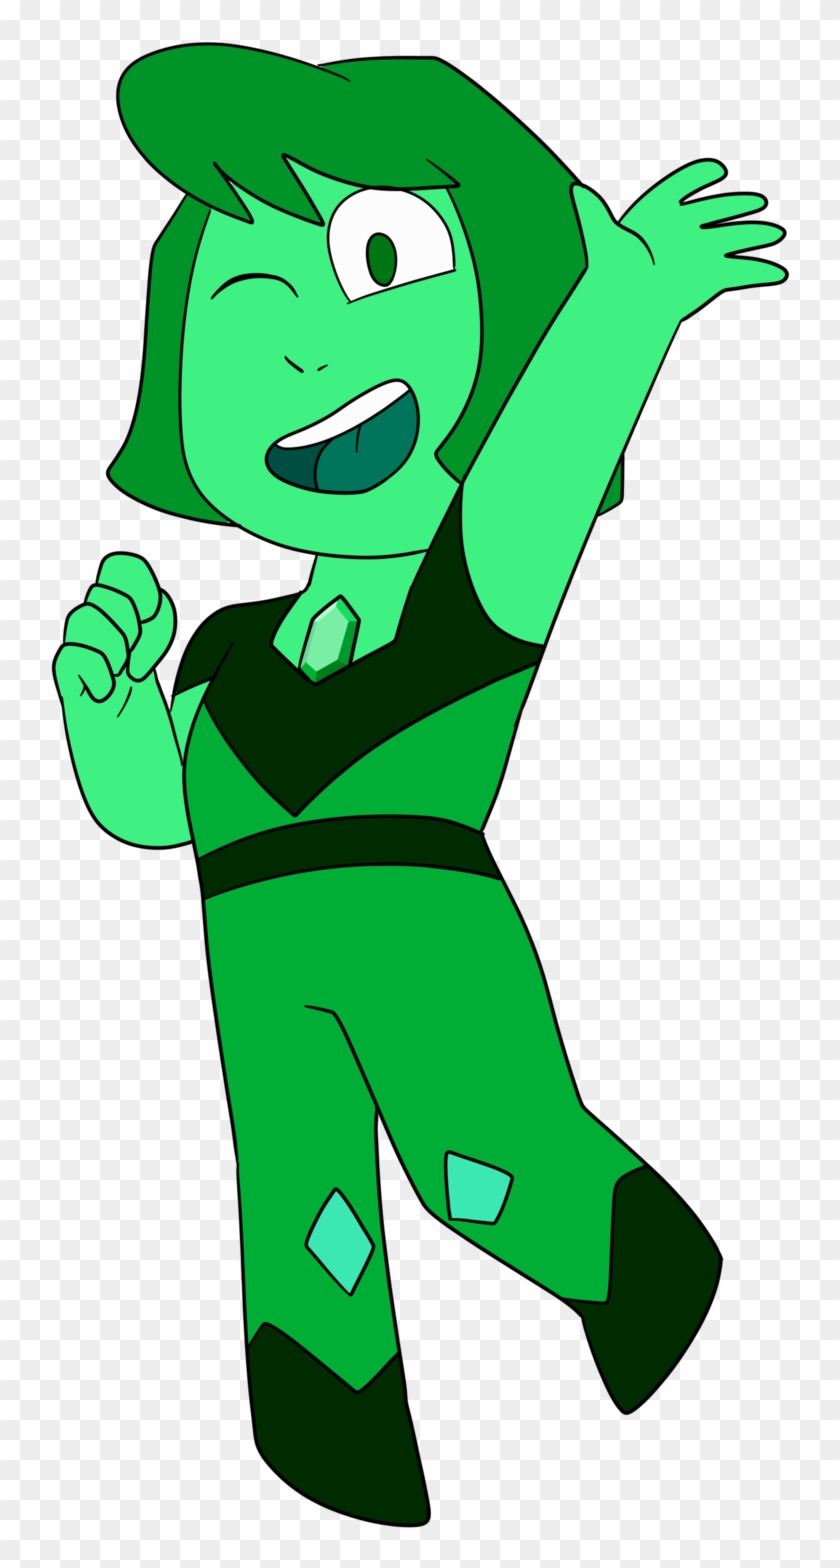 Emerald Gems Tend To Be Trouble Makers, And As A Team - Emerald Gems Tend To Be Trouble Makers, And As A Team #1546045